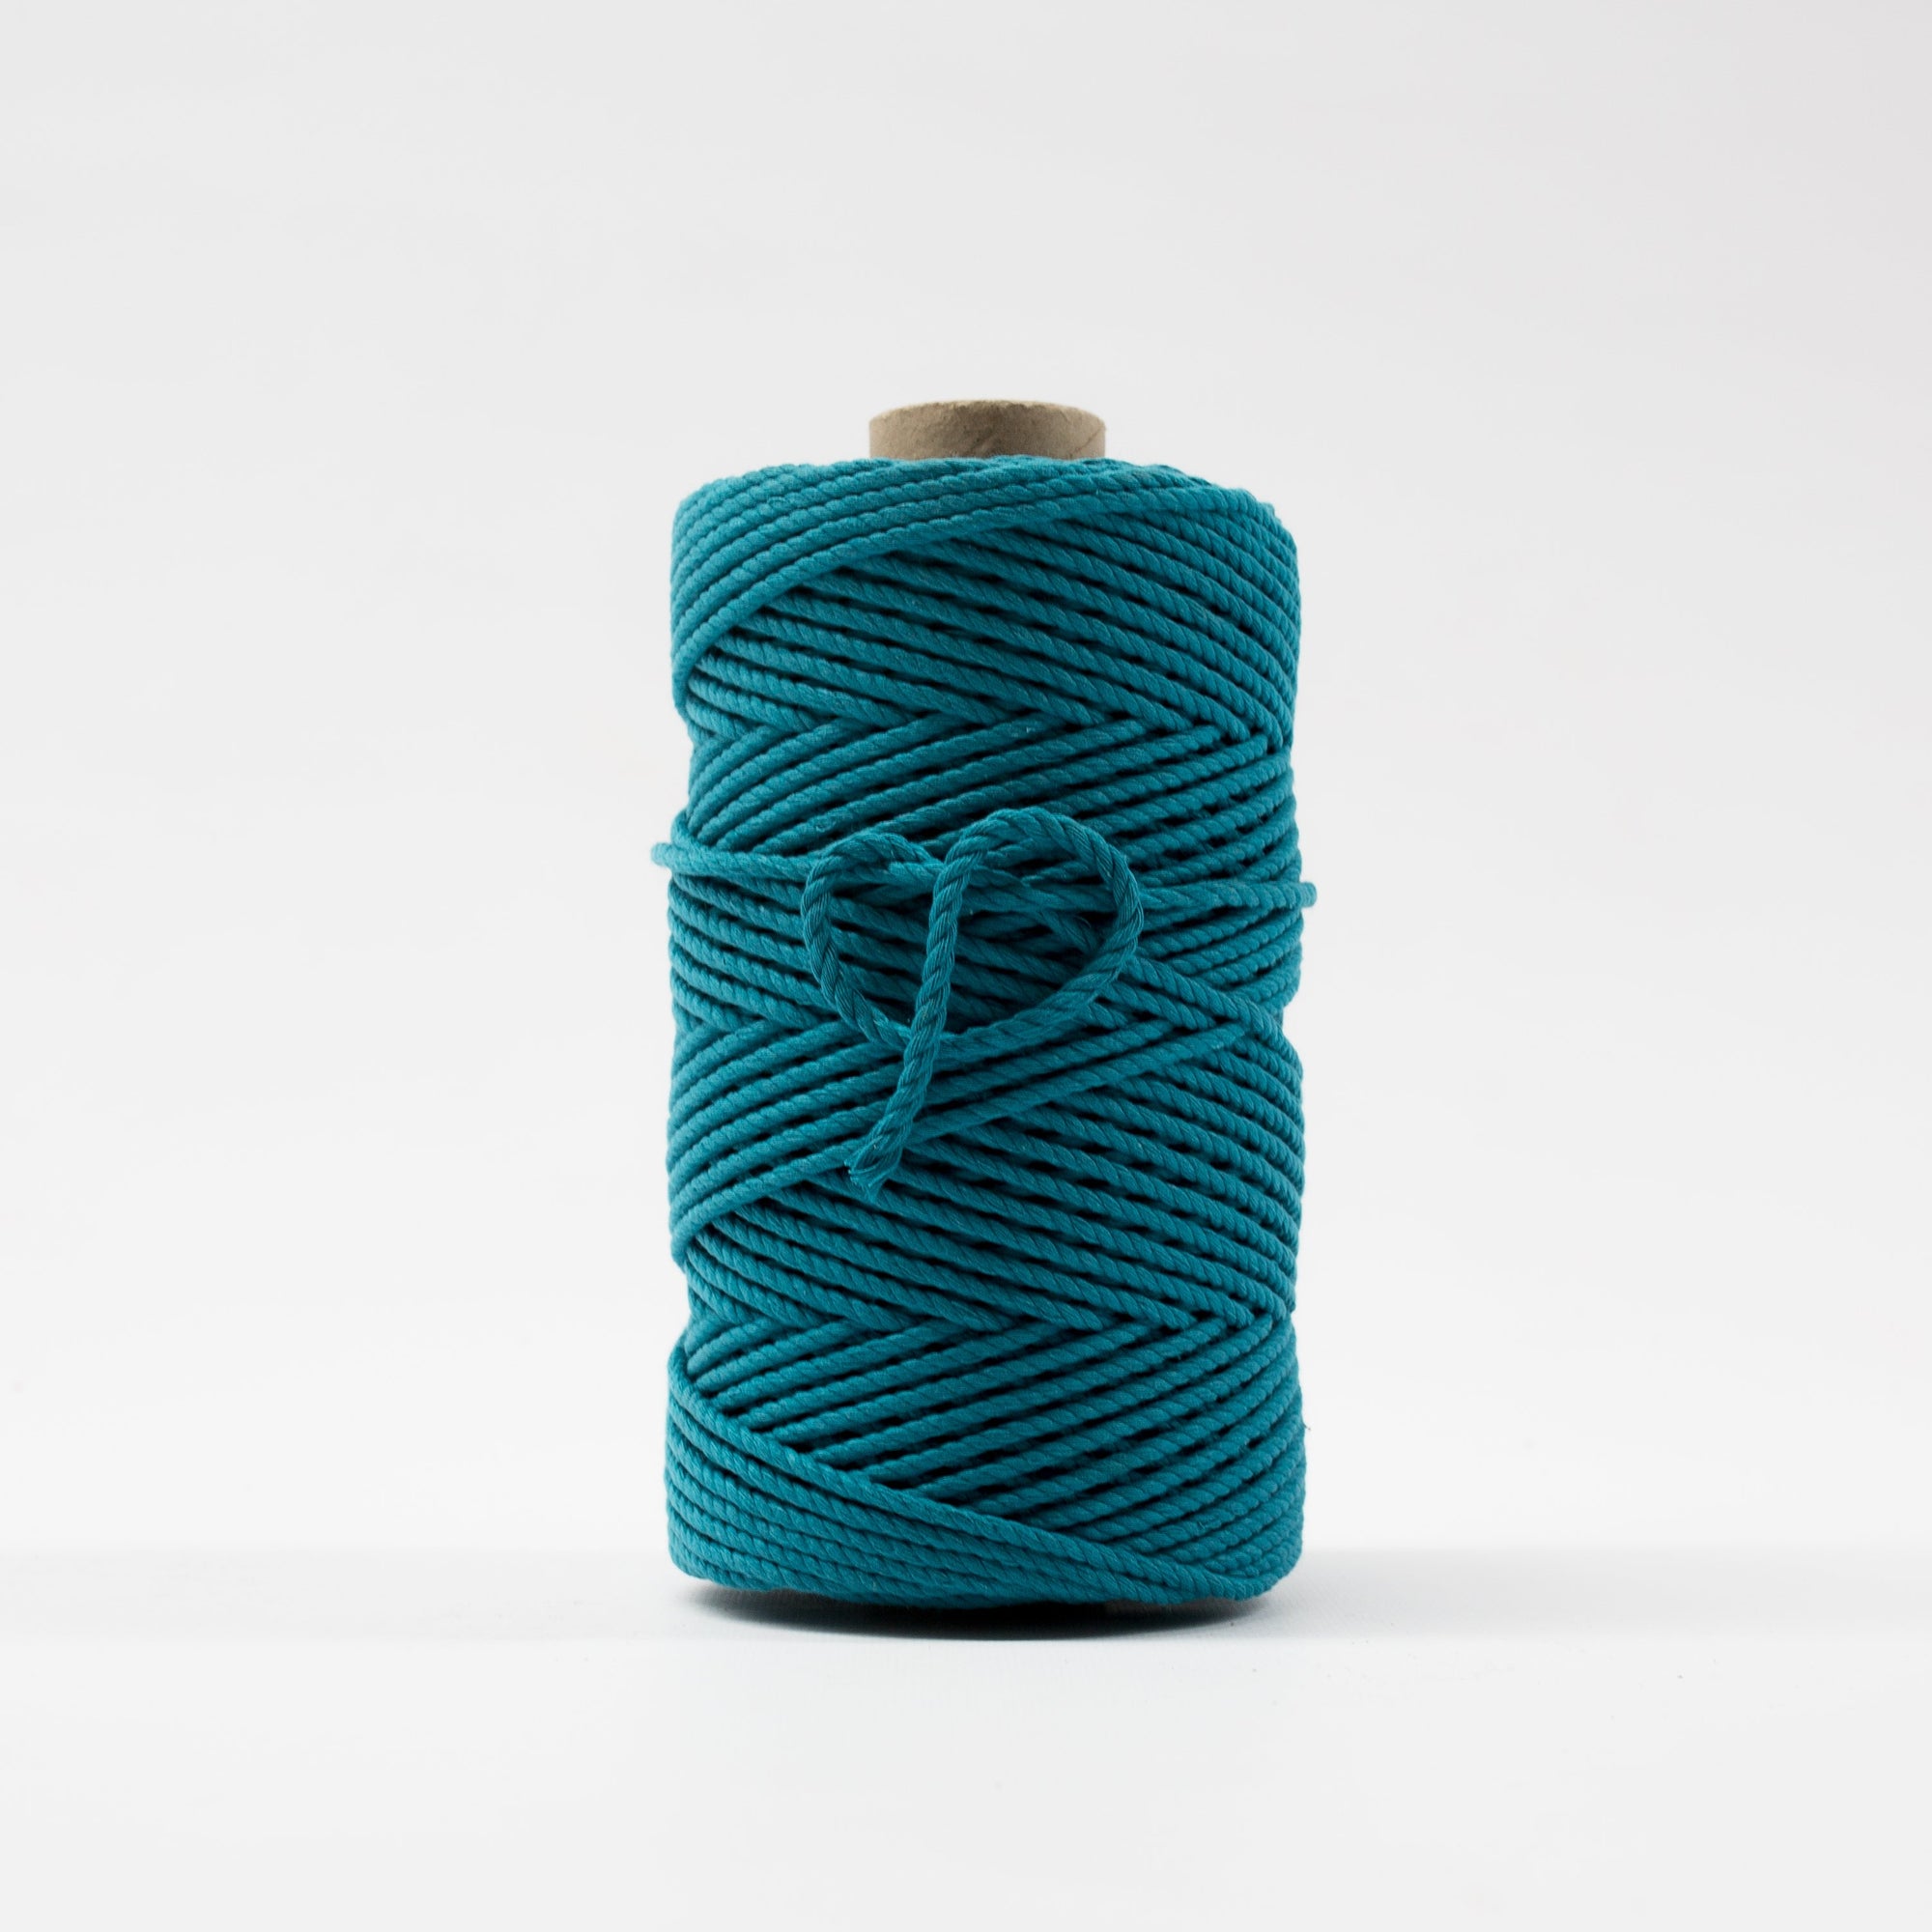 Mary Maker Studio Luxe Colour Cotton 4mm 1KG Recycled Luxe Macrame Rope // Rockpool Blue macrame cotton macrame rope macrame workshop macrame patterns macrame